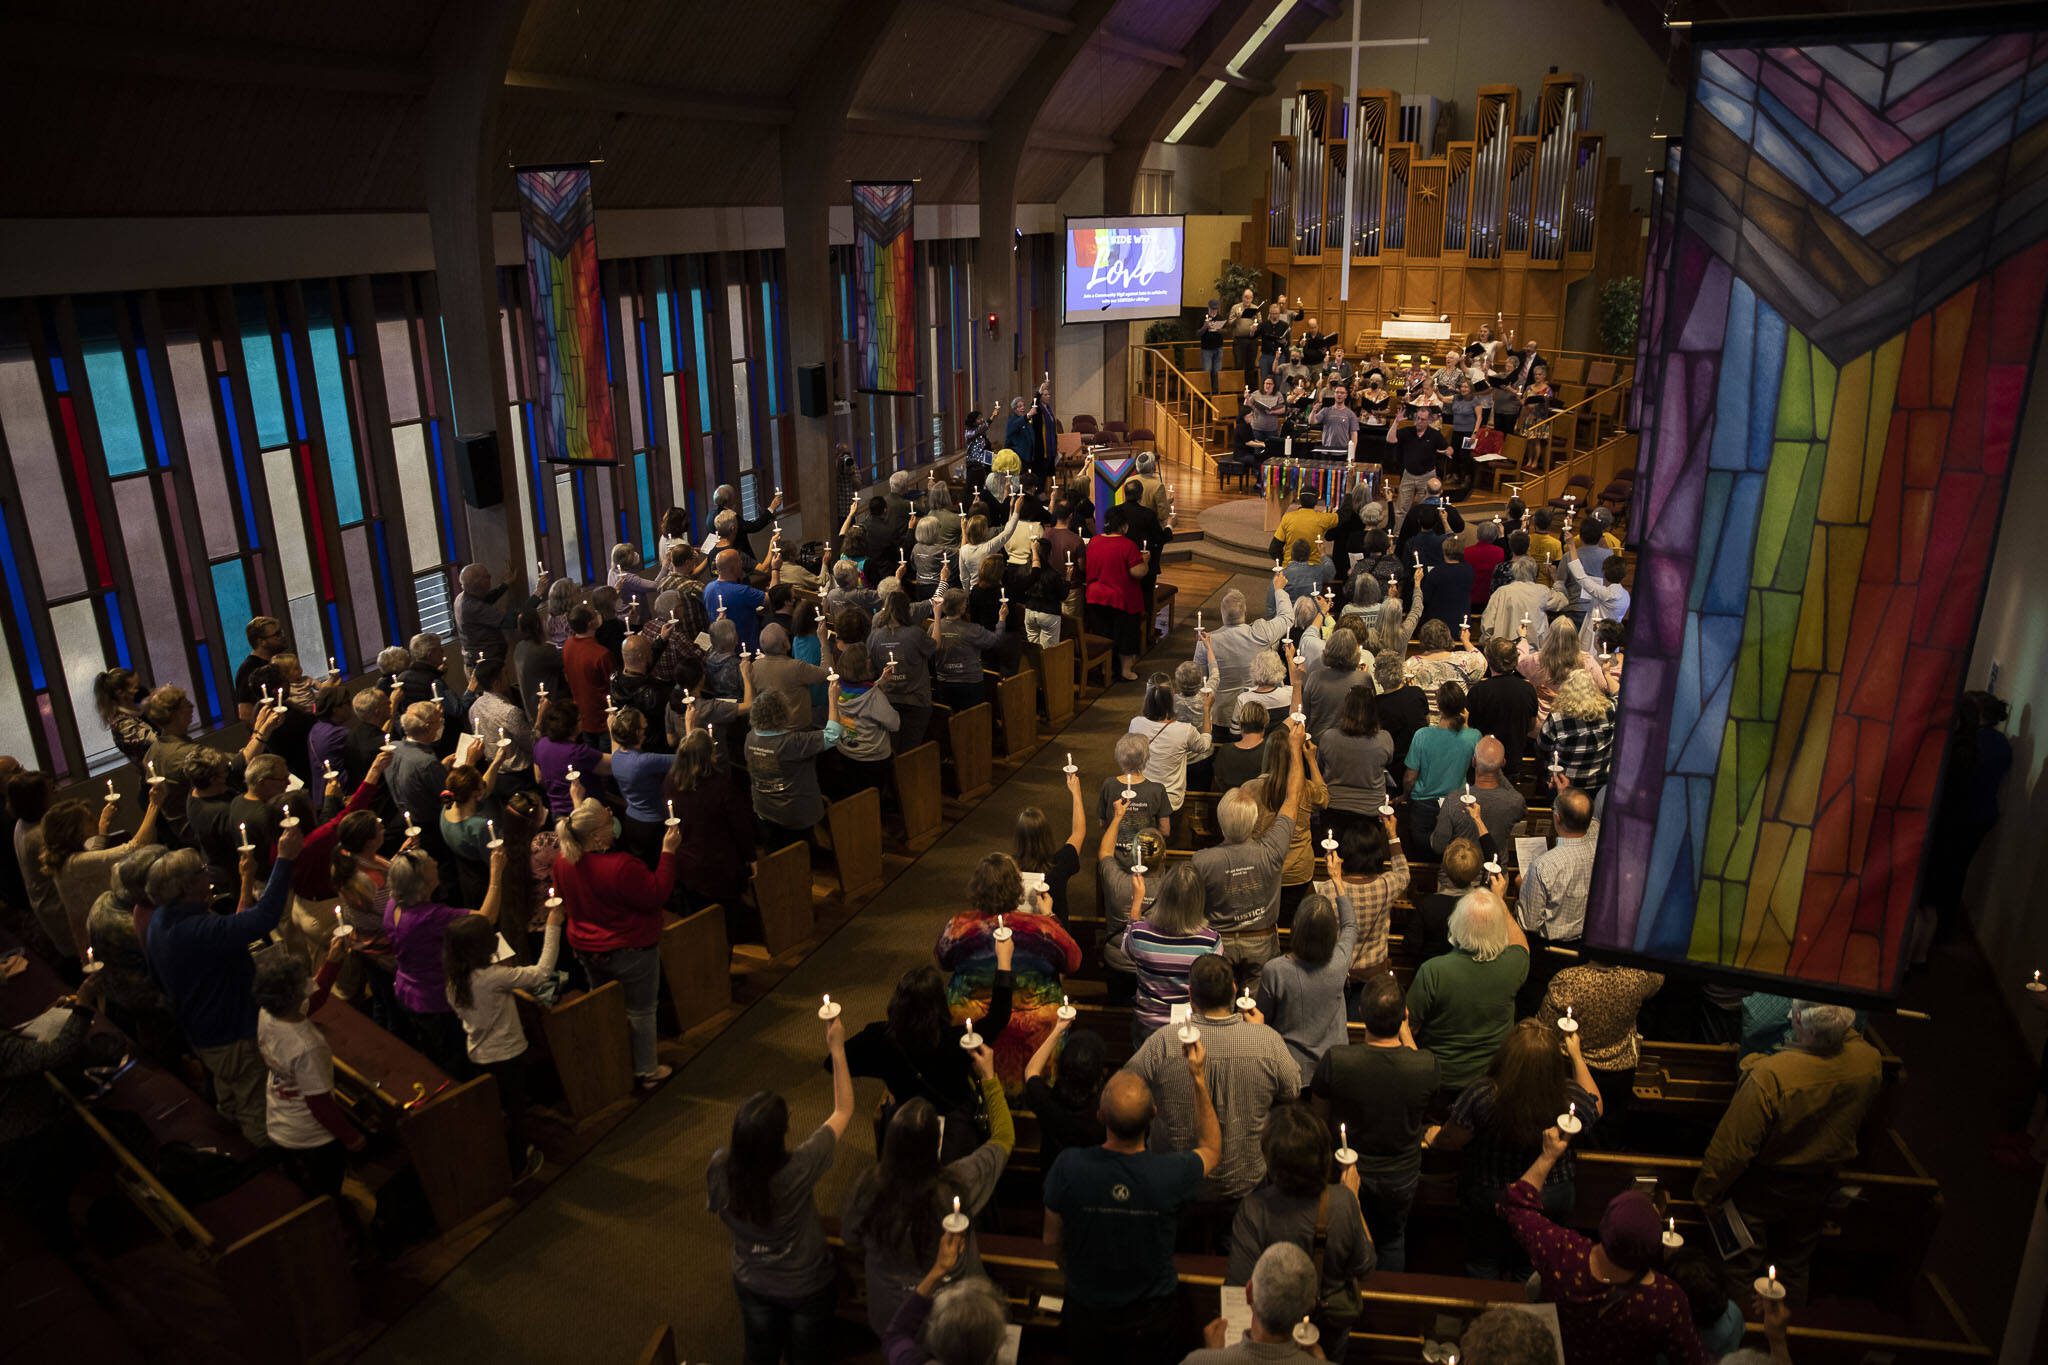 Attendees raise up candles during a vigil held at Edmonds United Methodist Church to show support of the LGBTQIA+ community in response to the recent hate-filled incidents at two regional churches on Tuesday, May 2, 2023 in Edmonds, Washington. (Olivia Vanni / The Herald)